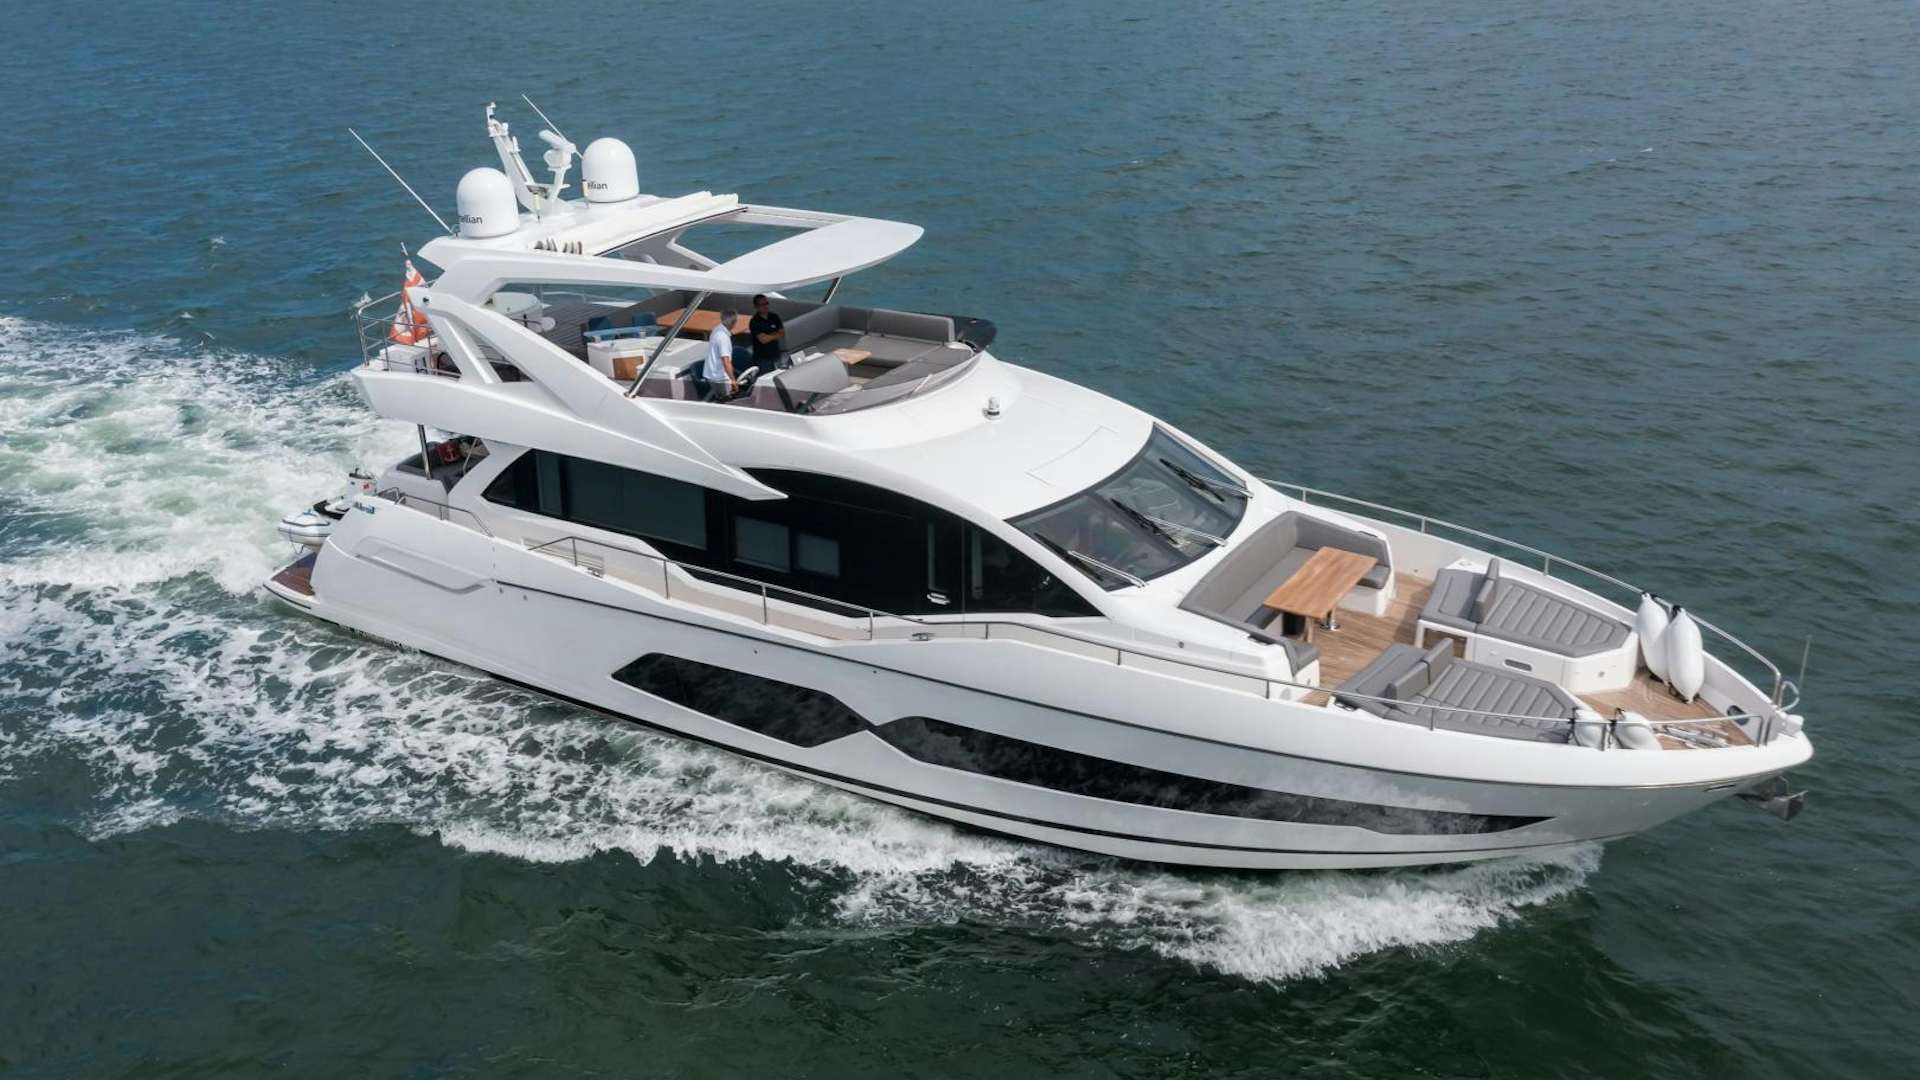 Mr. g
Yacht for Sale